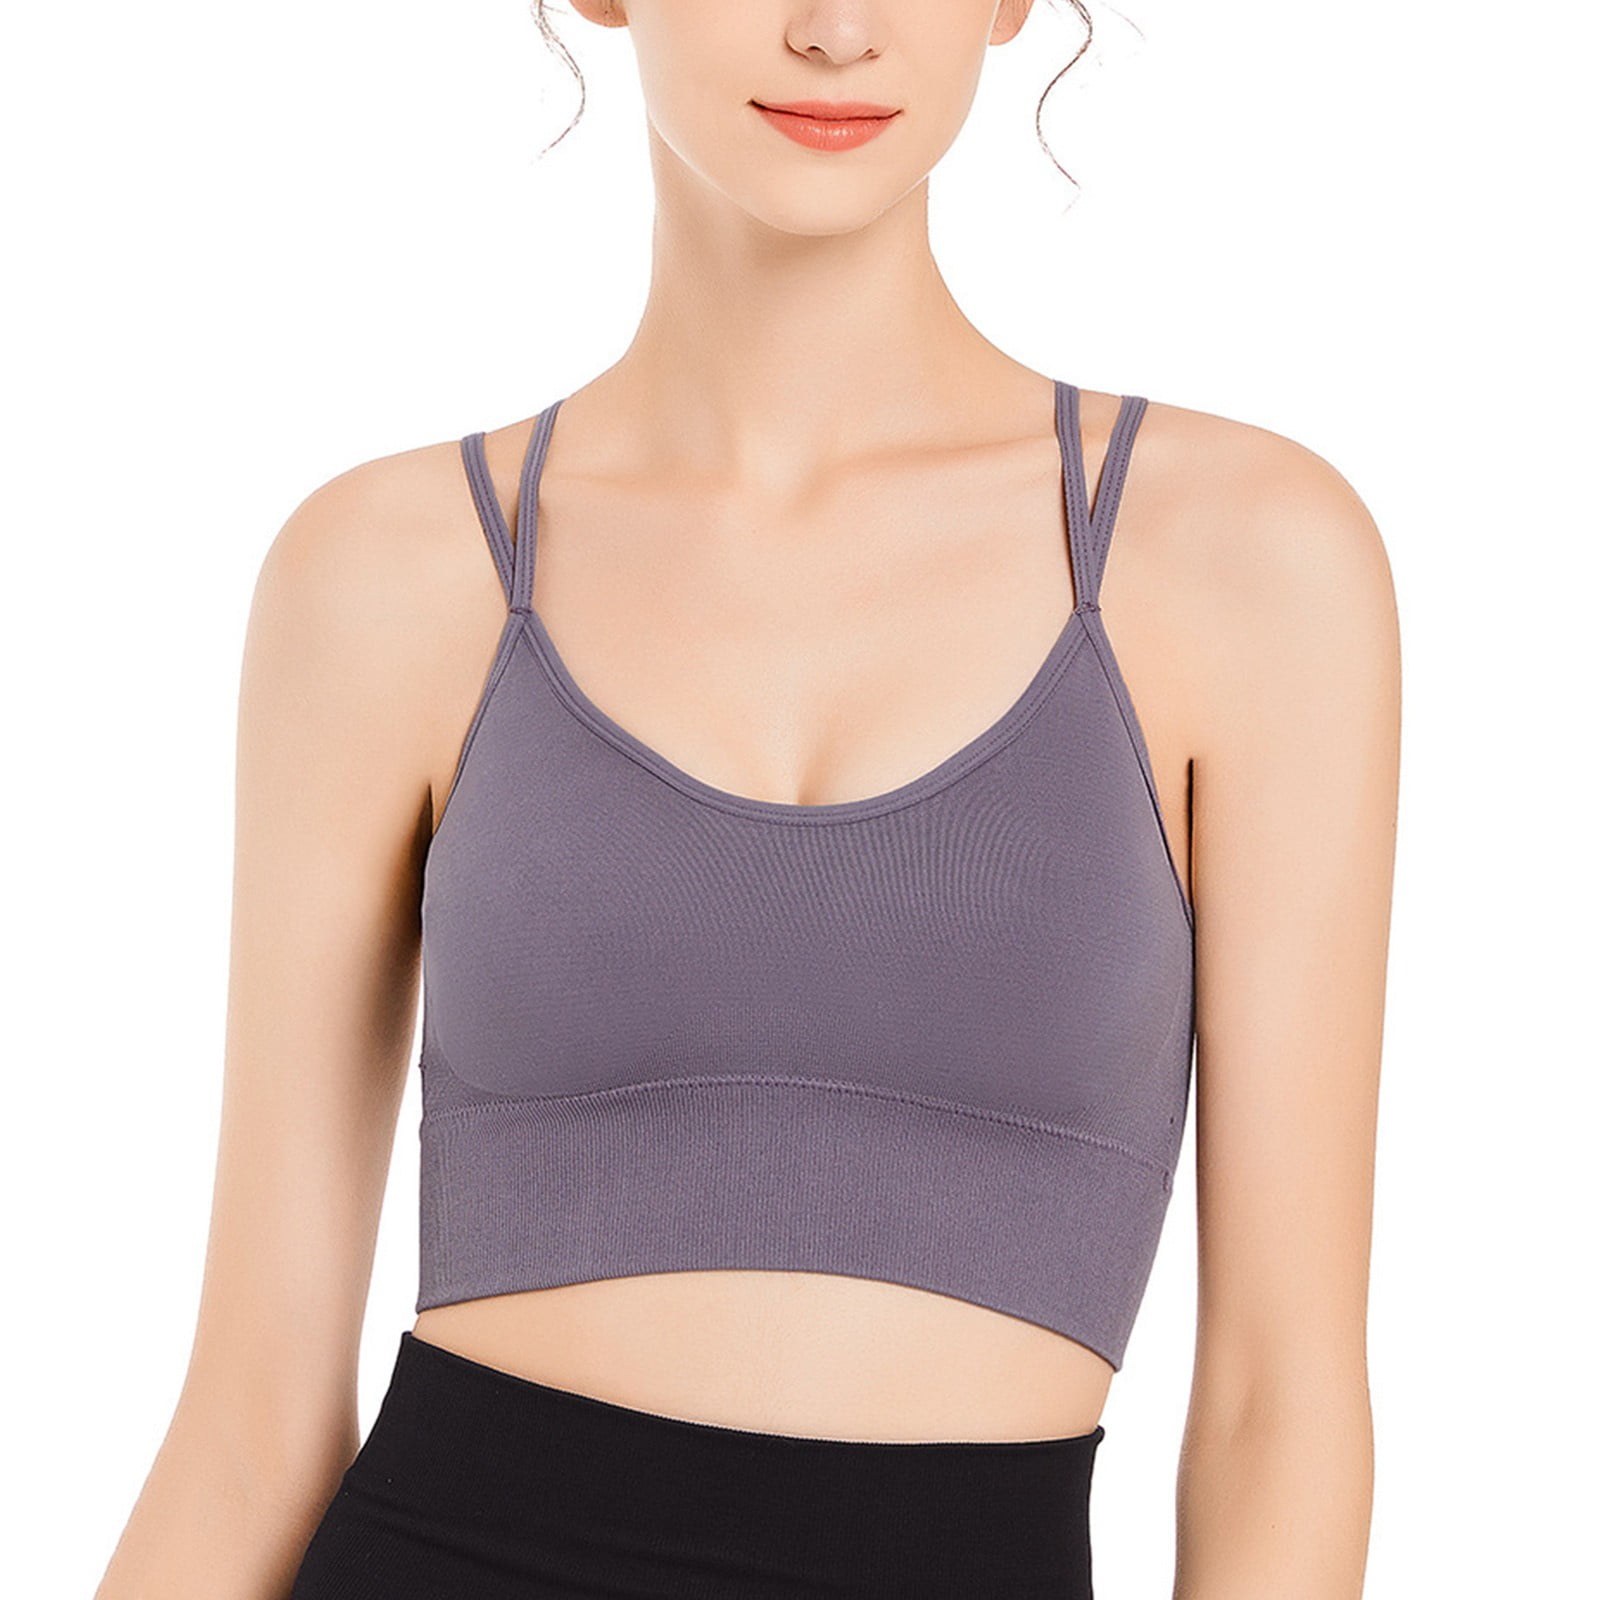 CAICJ98 Womens Lingerie Yoga Tank Tops for Women Built in Shelf Bra B/C  Cups Strappy Back Activewear Workout Compression Tops Grey,S